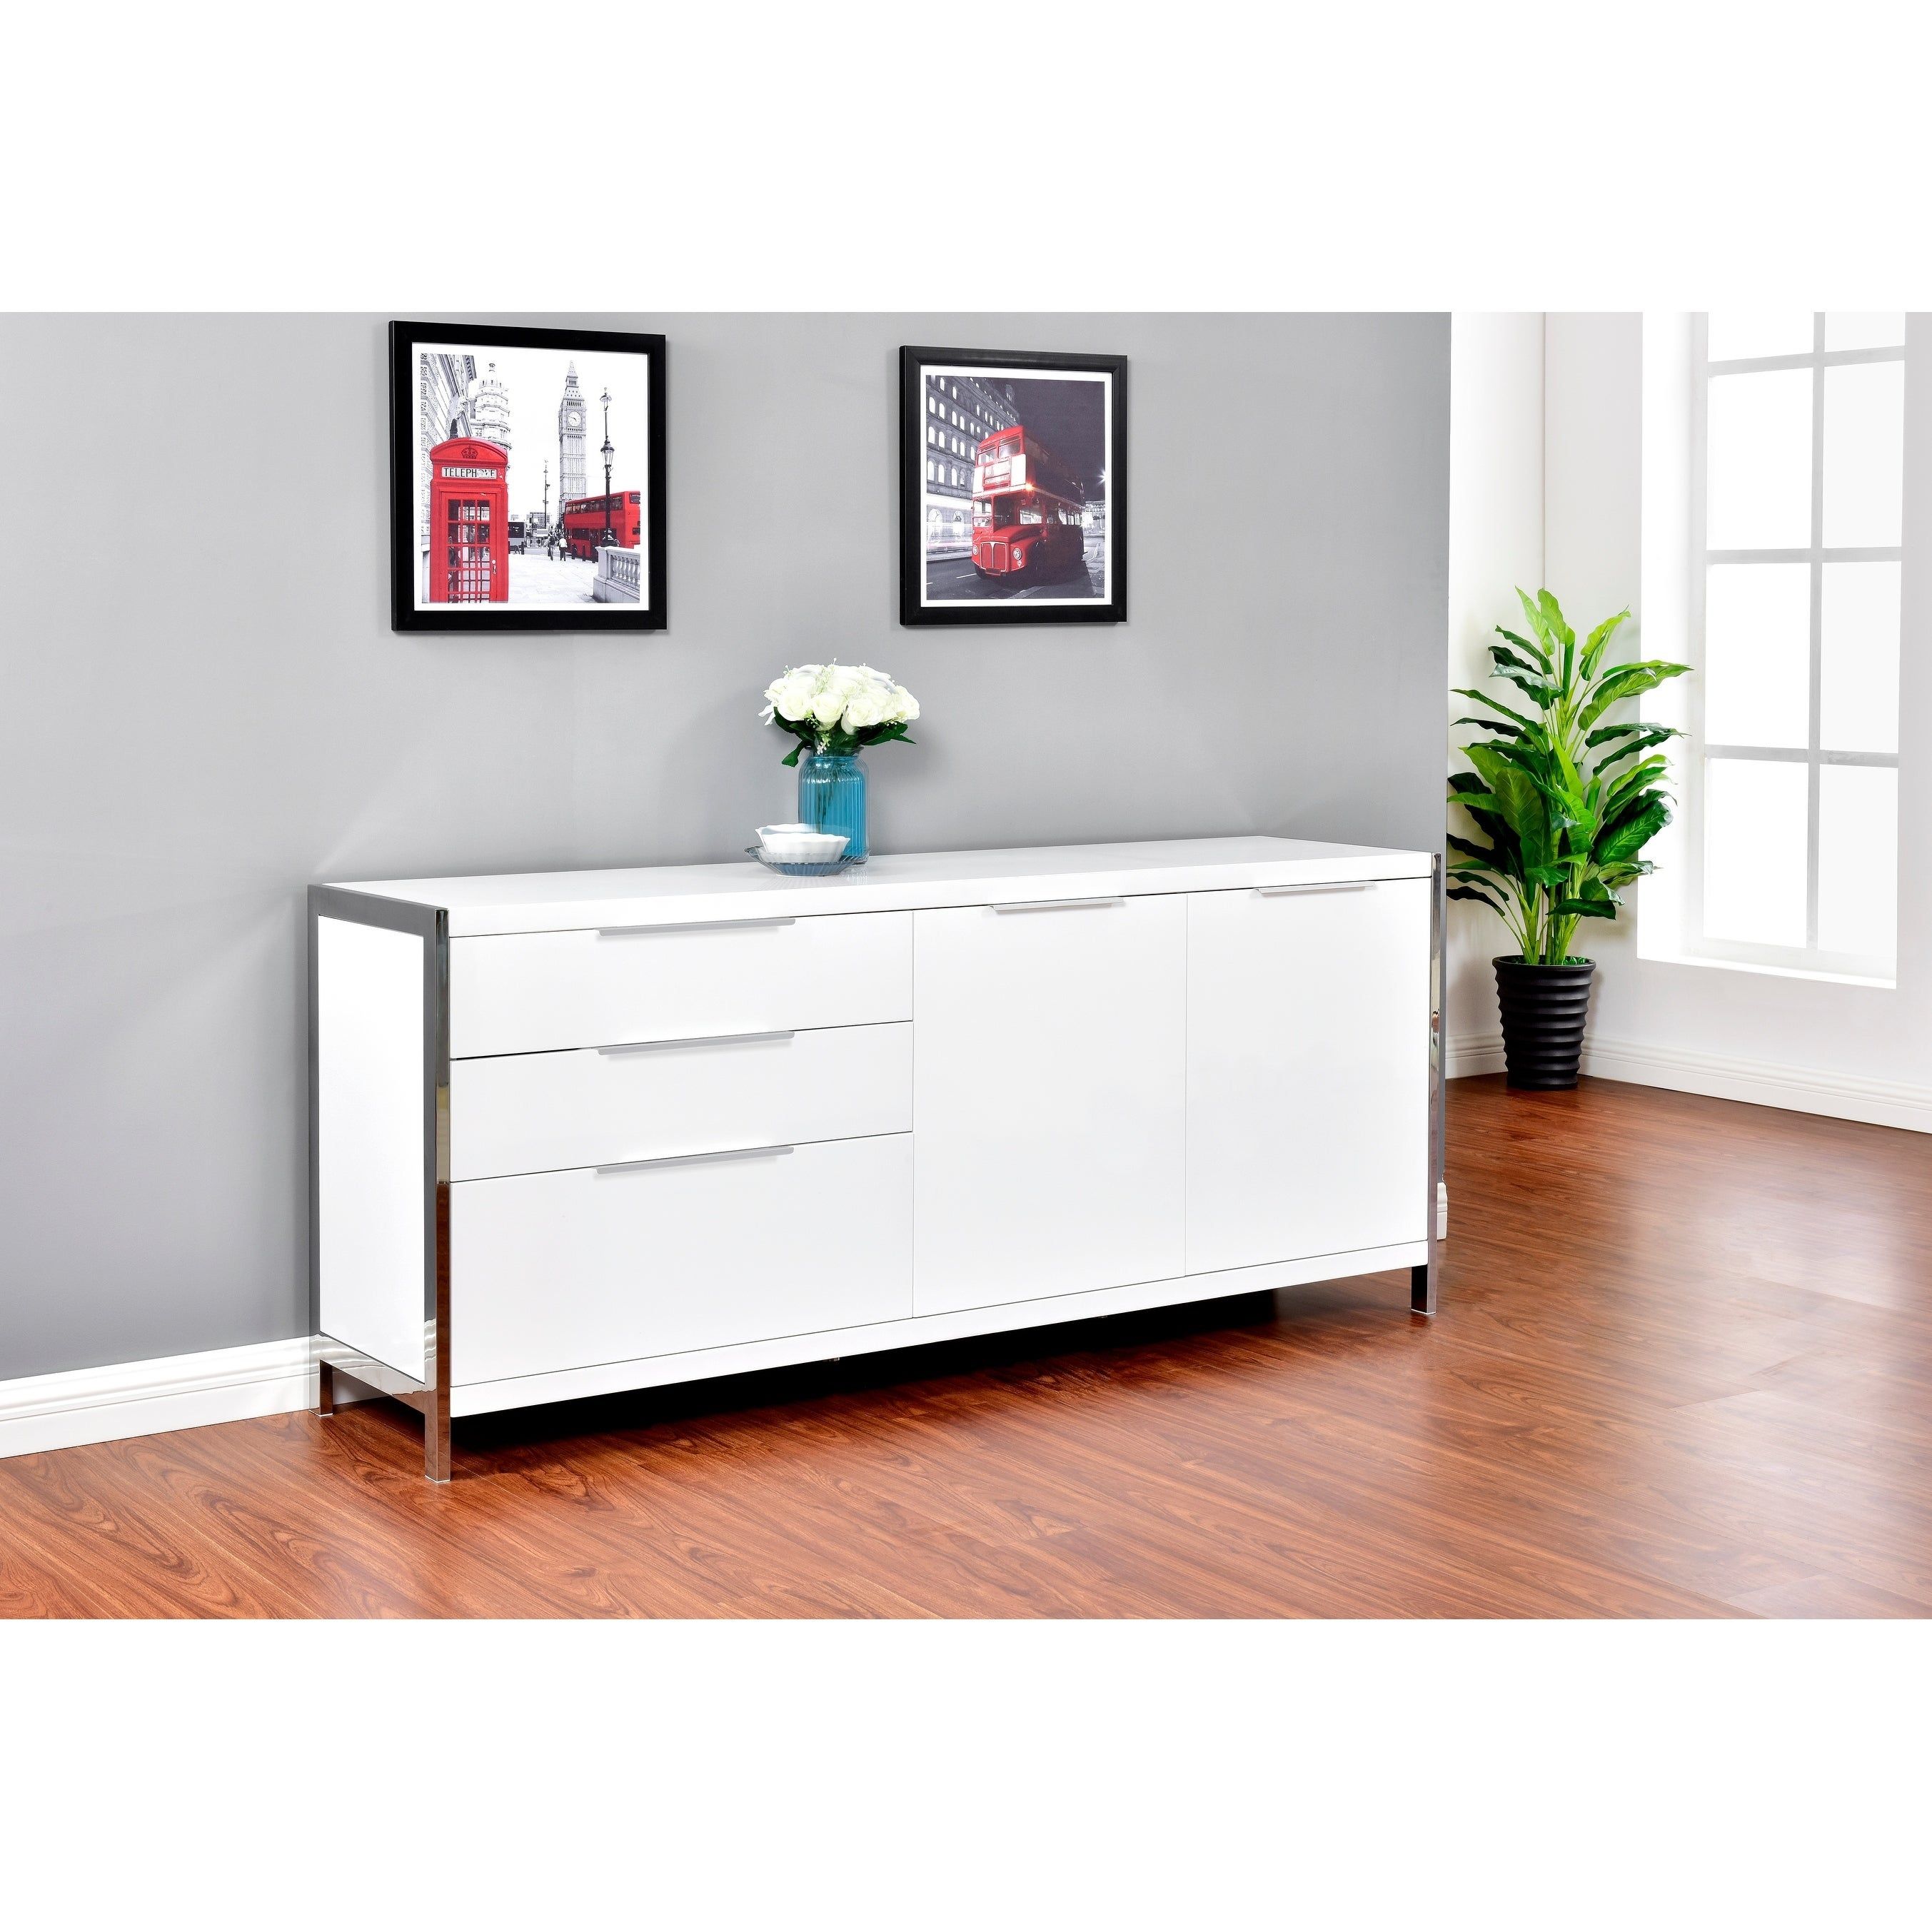 Best Quality Furniture Modern Lacquer 2 Door, 3 Drawer Cabinet Intended For 4 Door Lacquer Buffets (View 19 of 30)